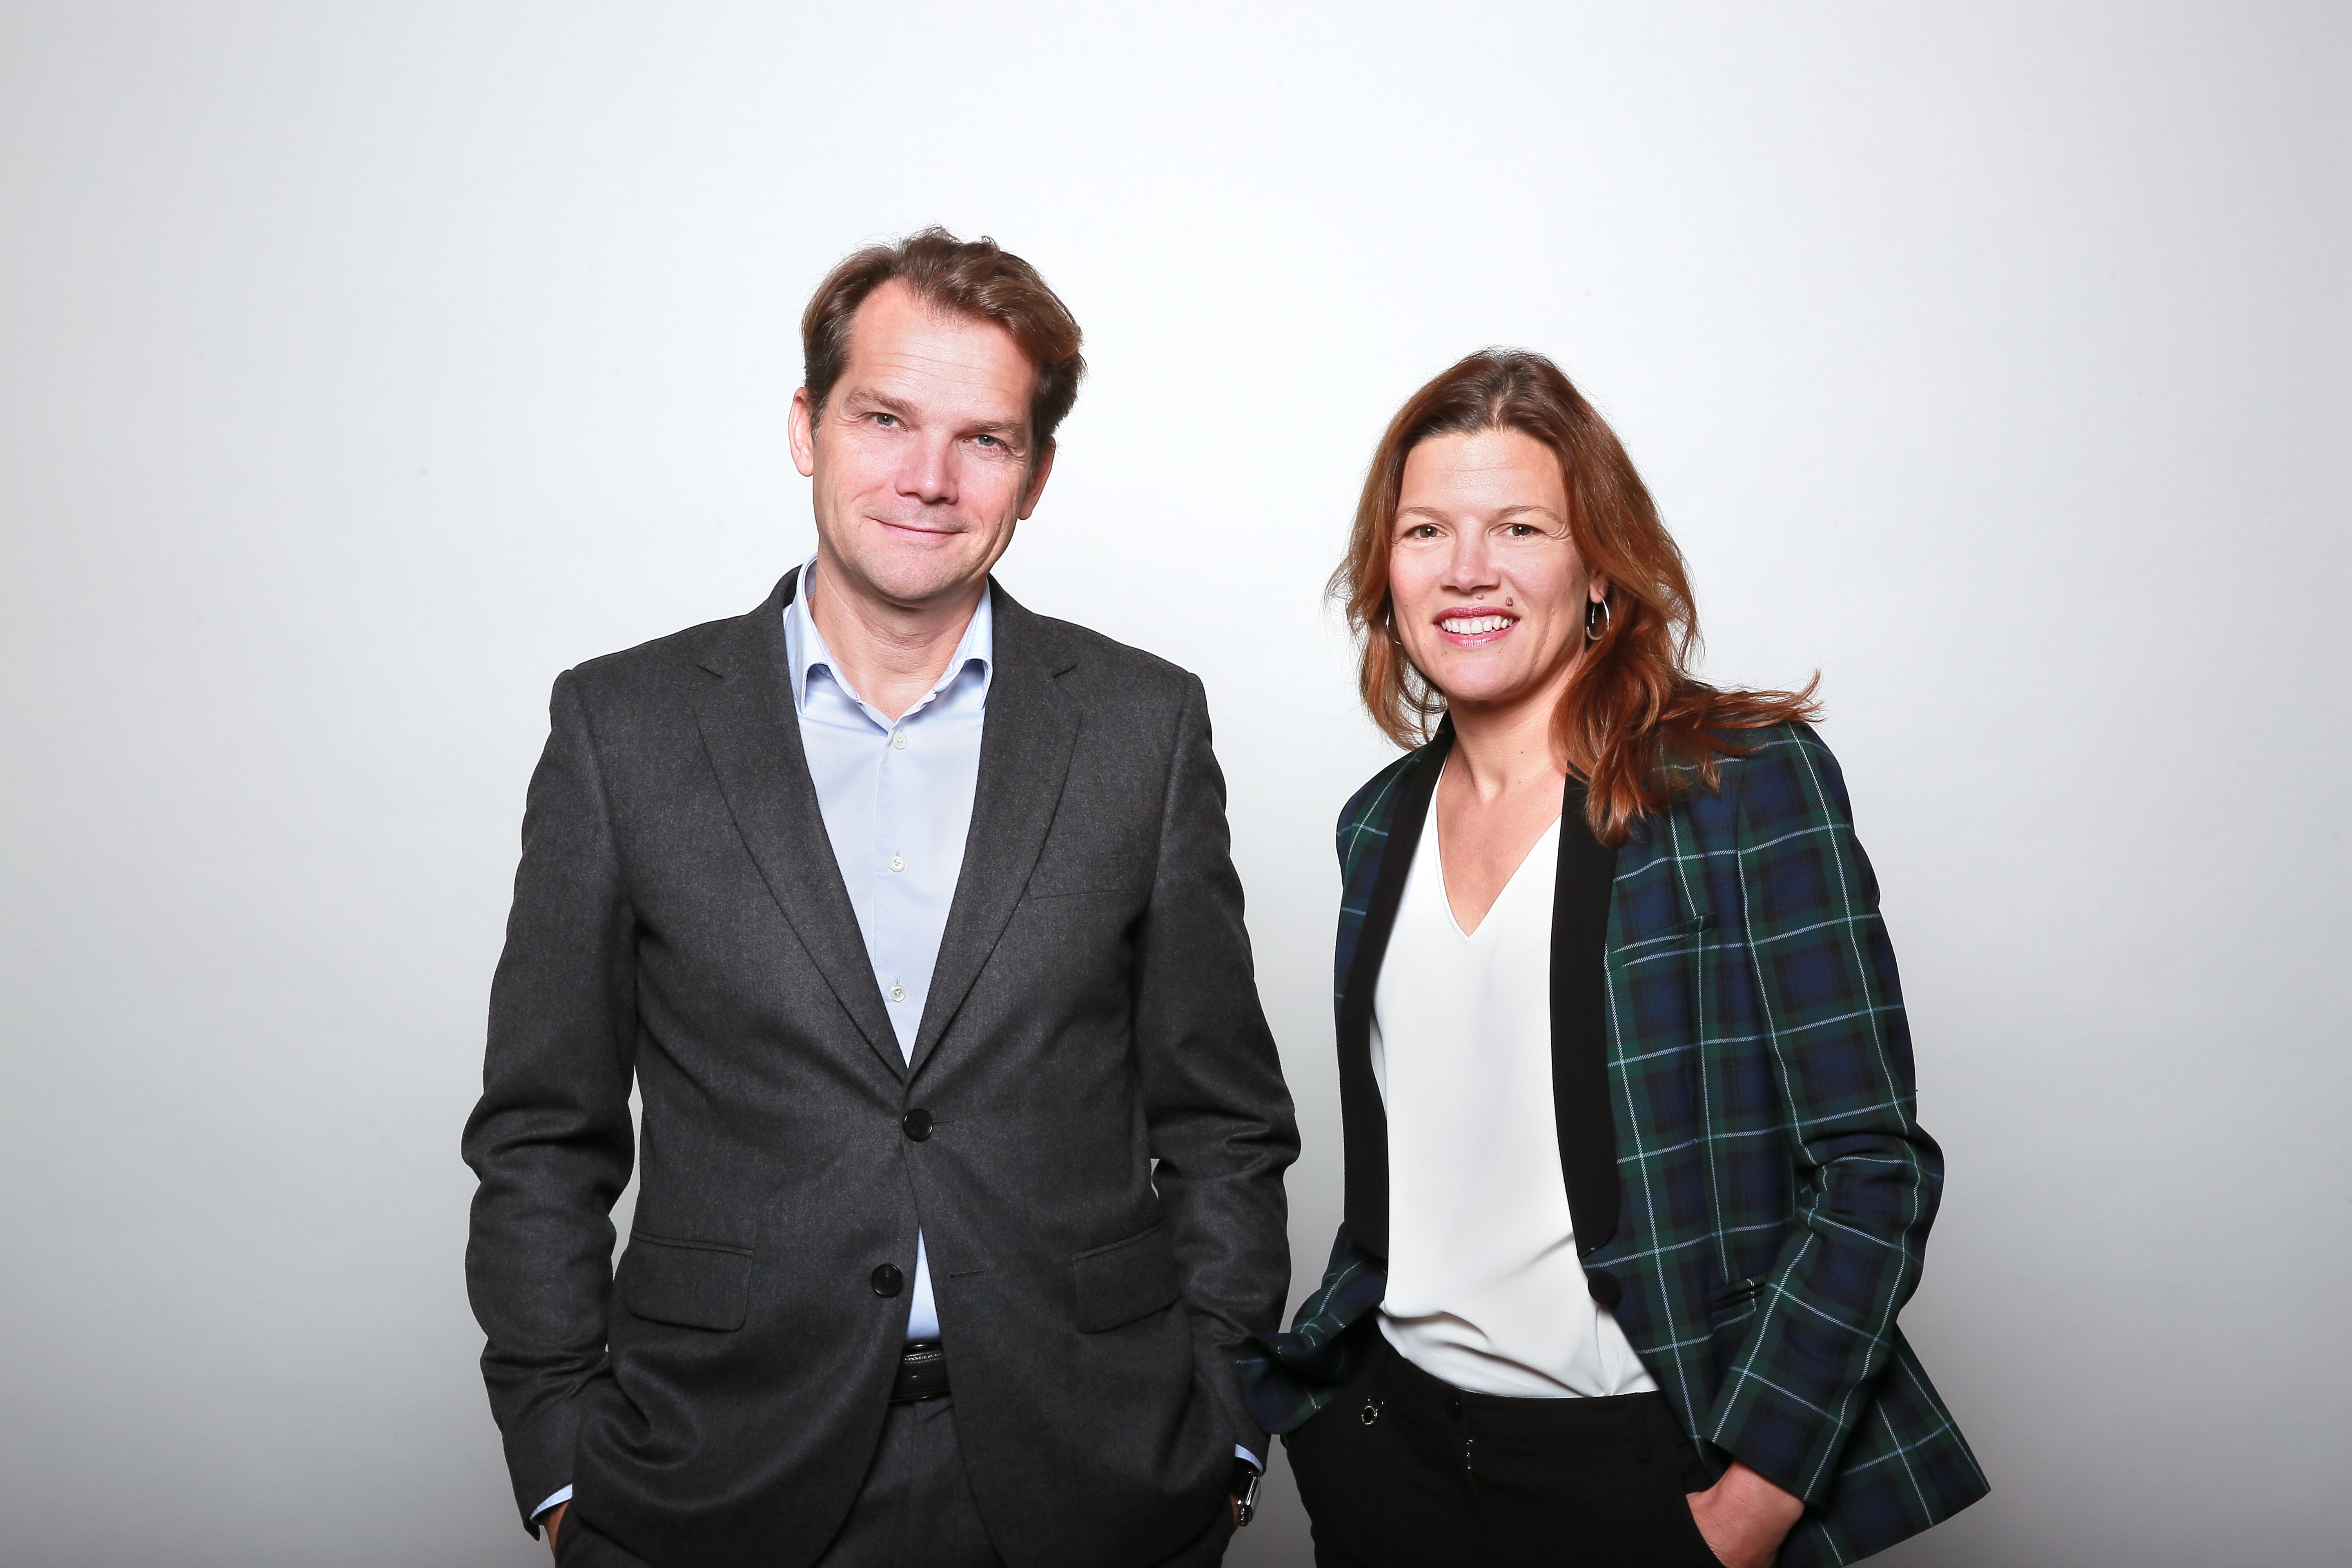 For François Rivolier and Fanny Letier, co-founders of Geneo Capital Entrepreneur, the ability of companies to bounce back will be intimately linked to the definition of their raison d'être.